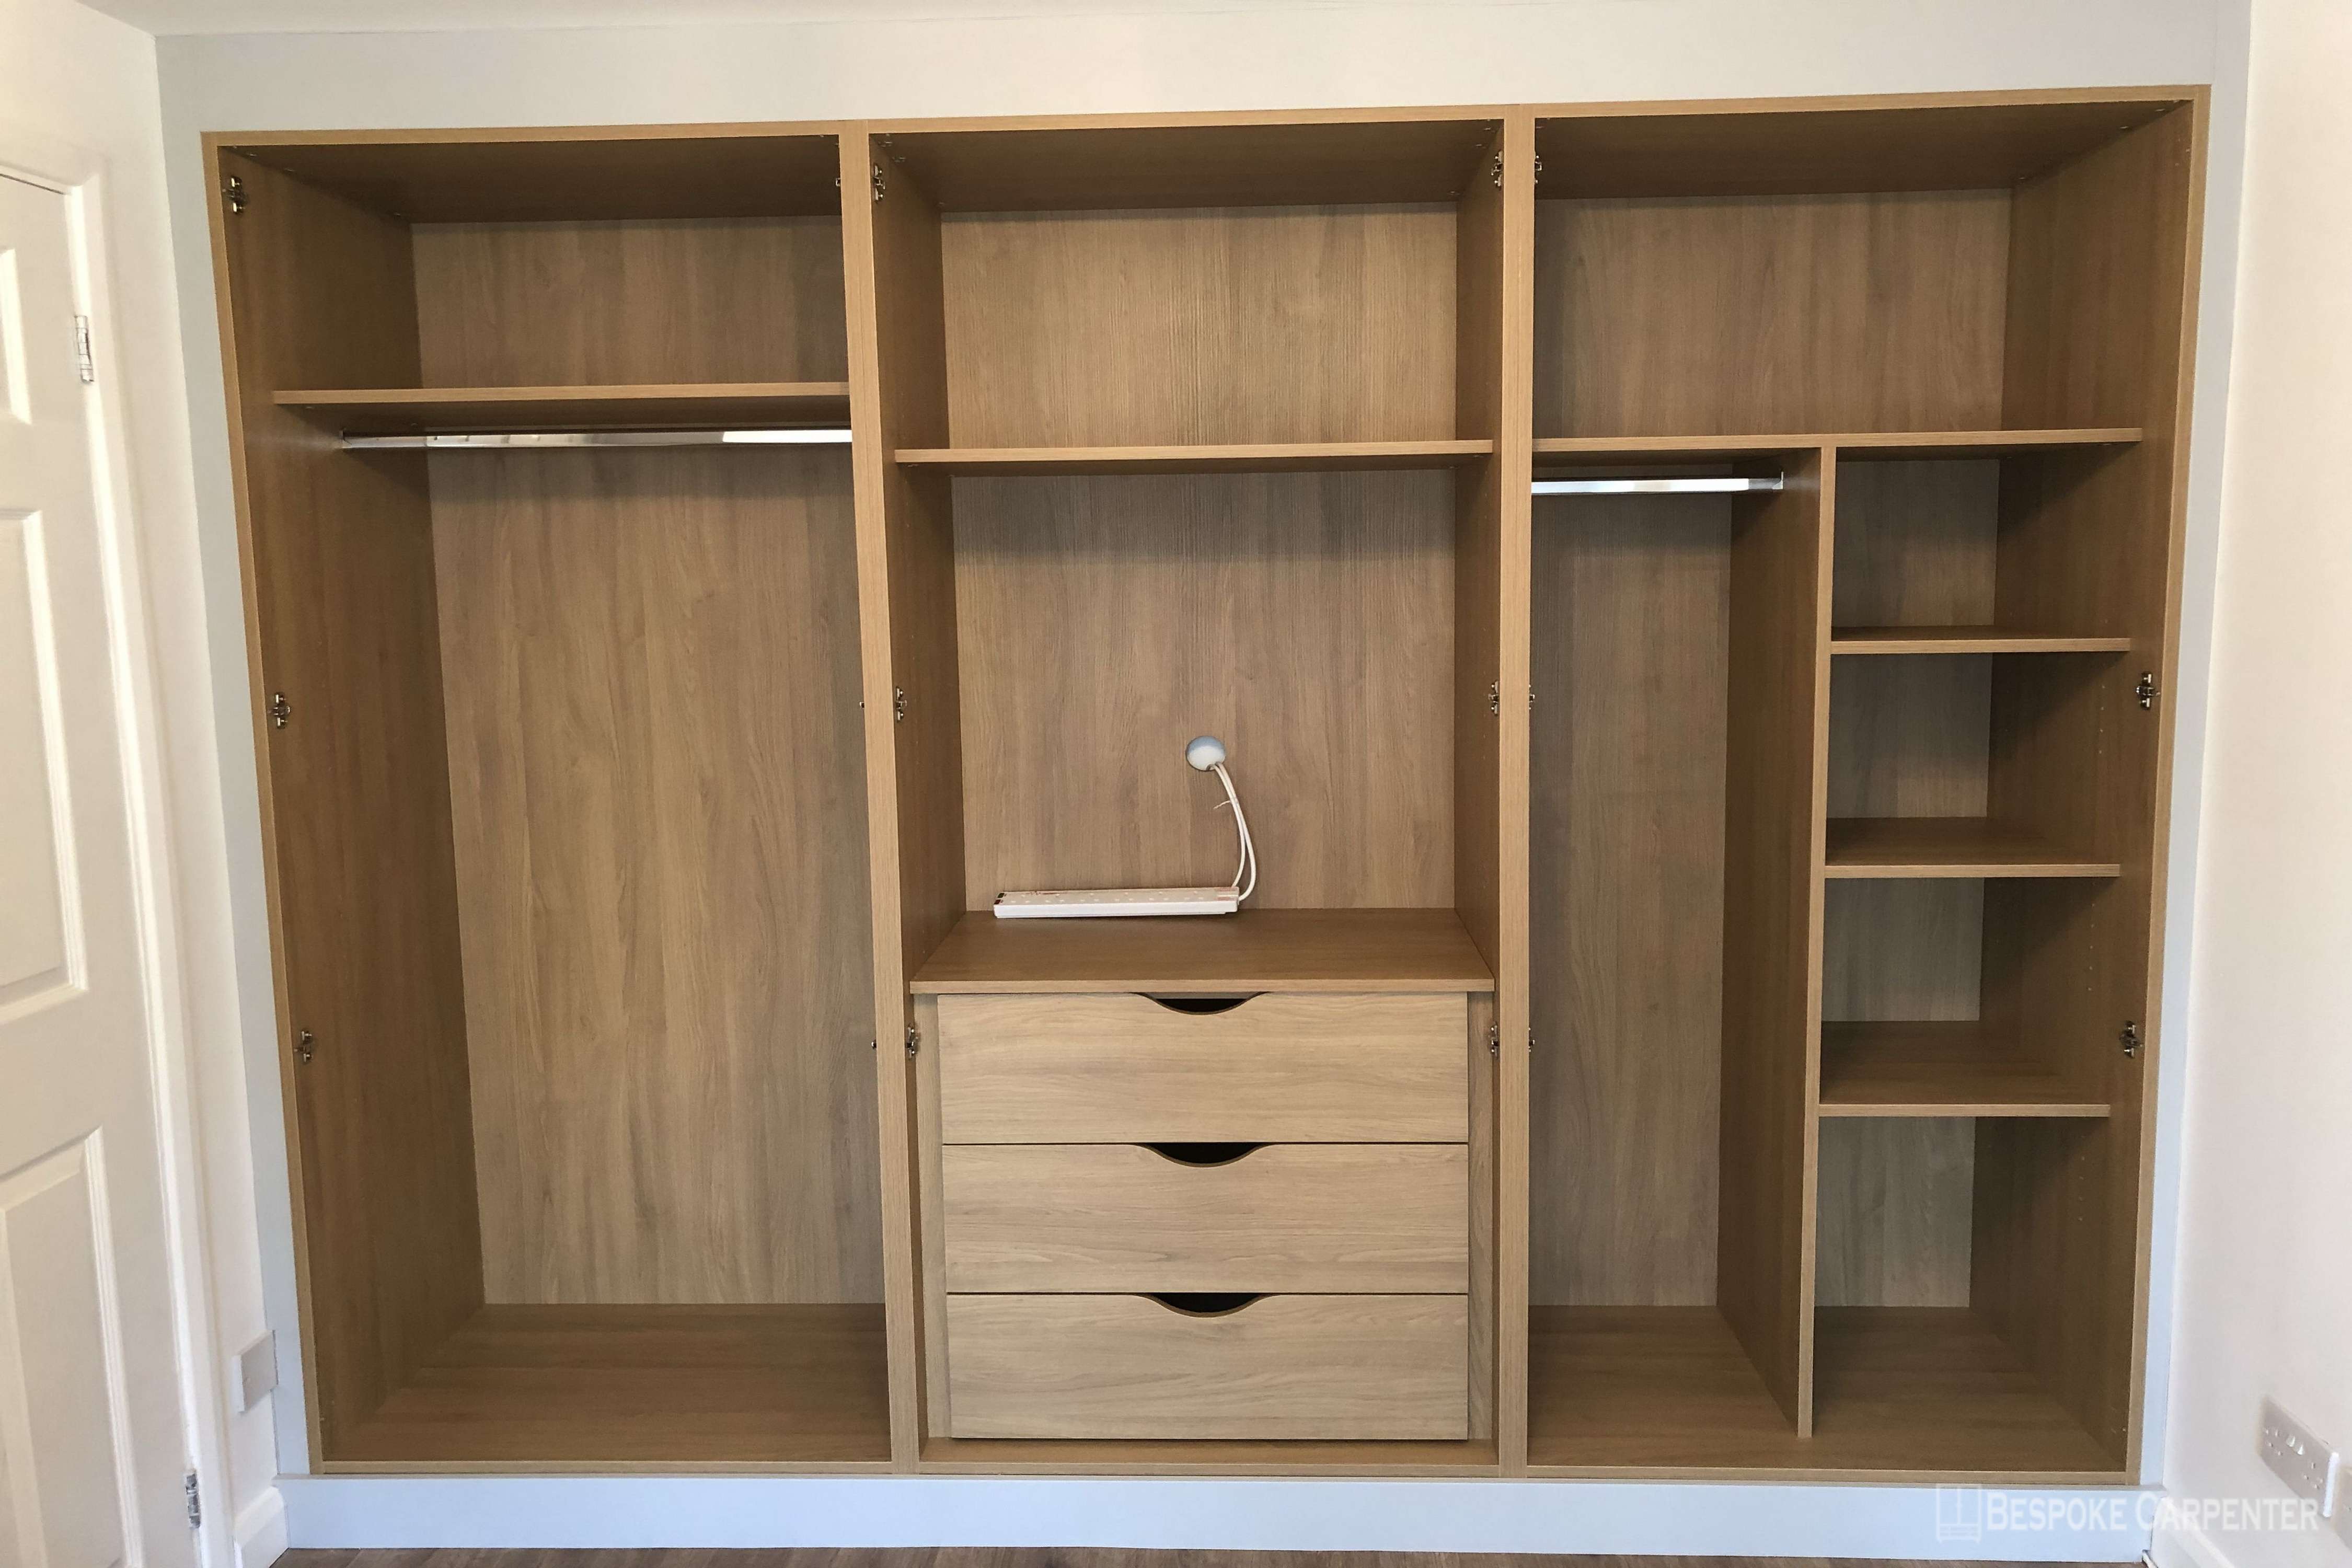 Bespoke carpentry and joinery in Norbury